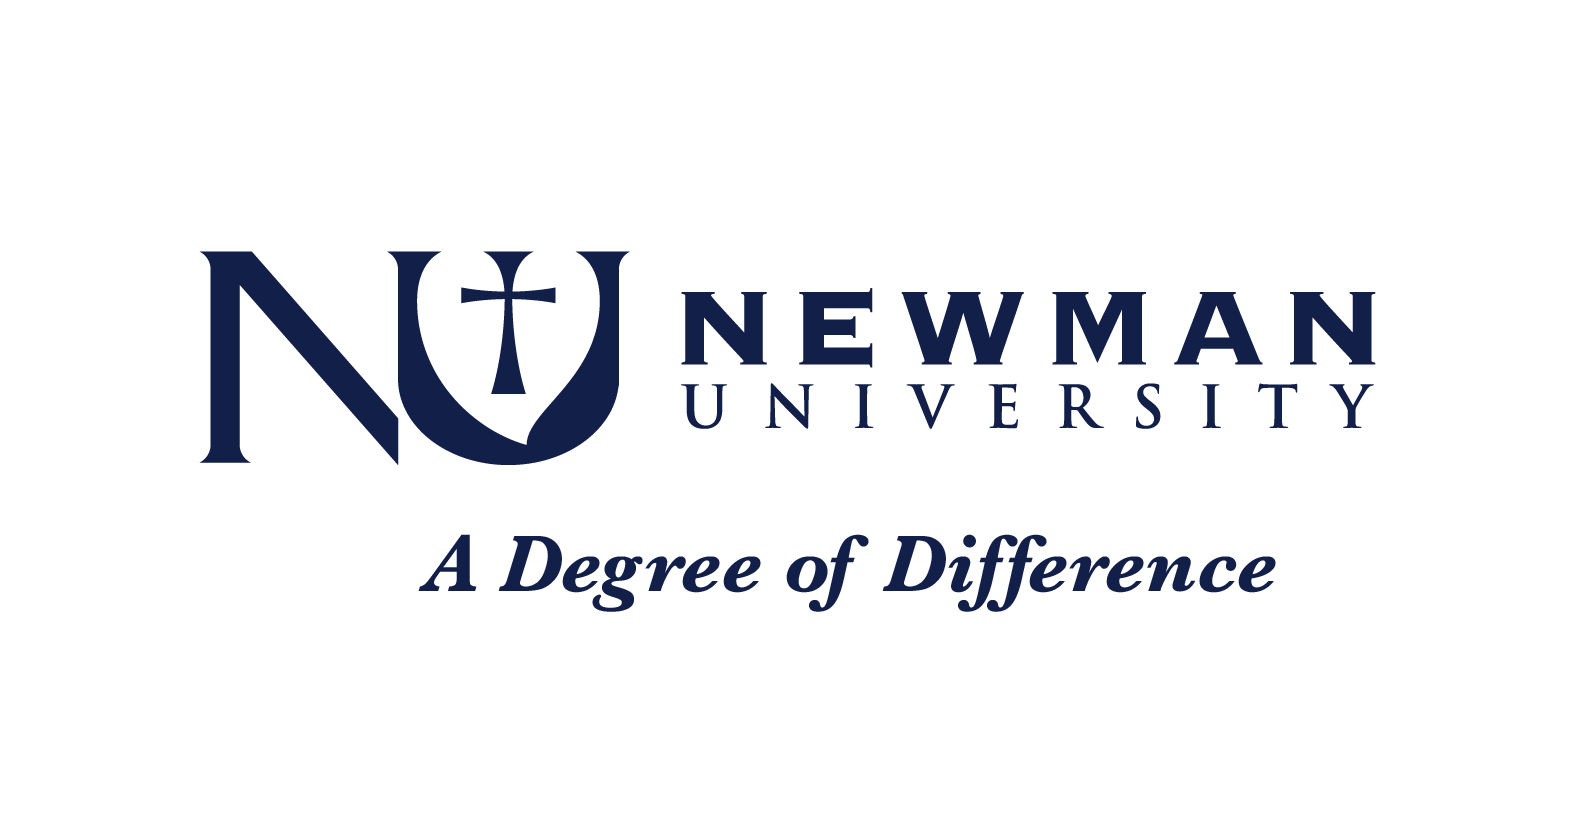 More than meets the eye:  
Newman University’s logo turns 20-years-old